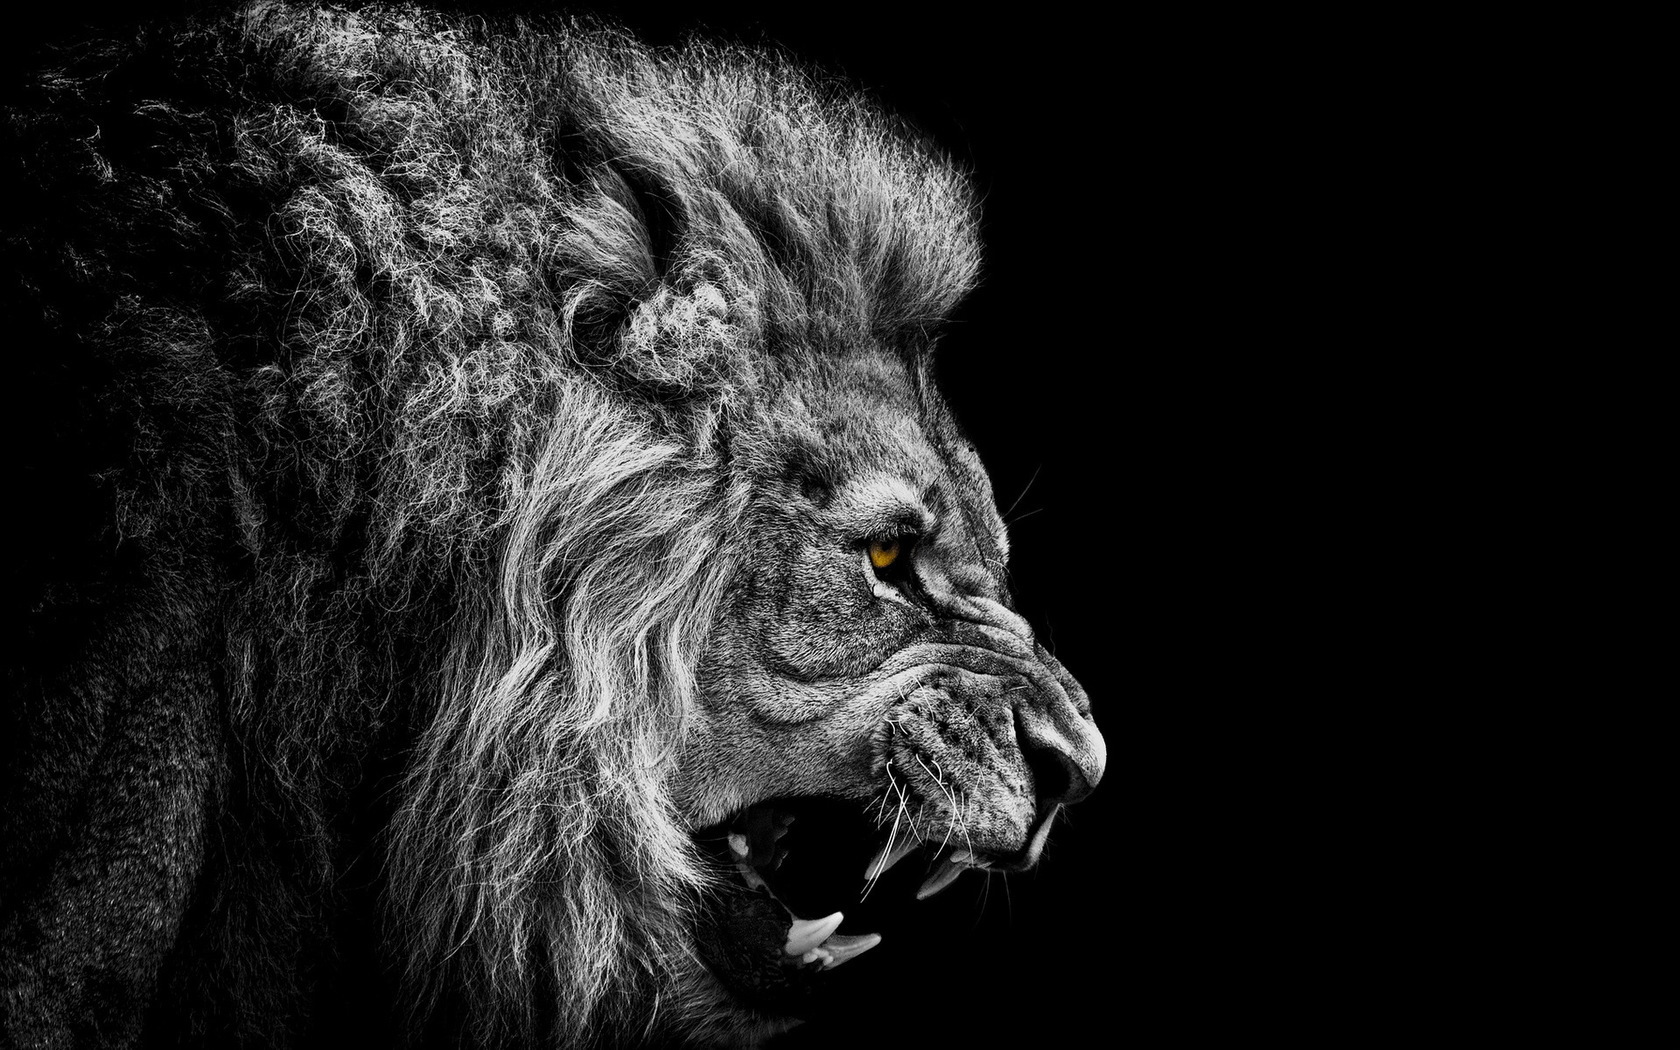 15676 download wallpaper animals, lions, gray, art photo screensavers and pictures for free